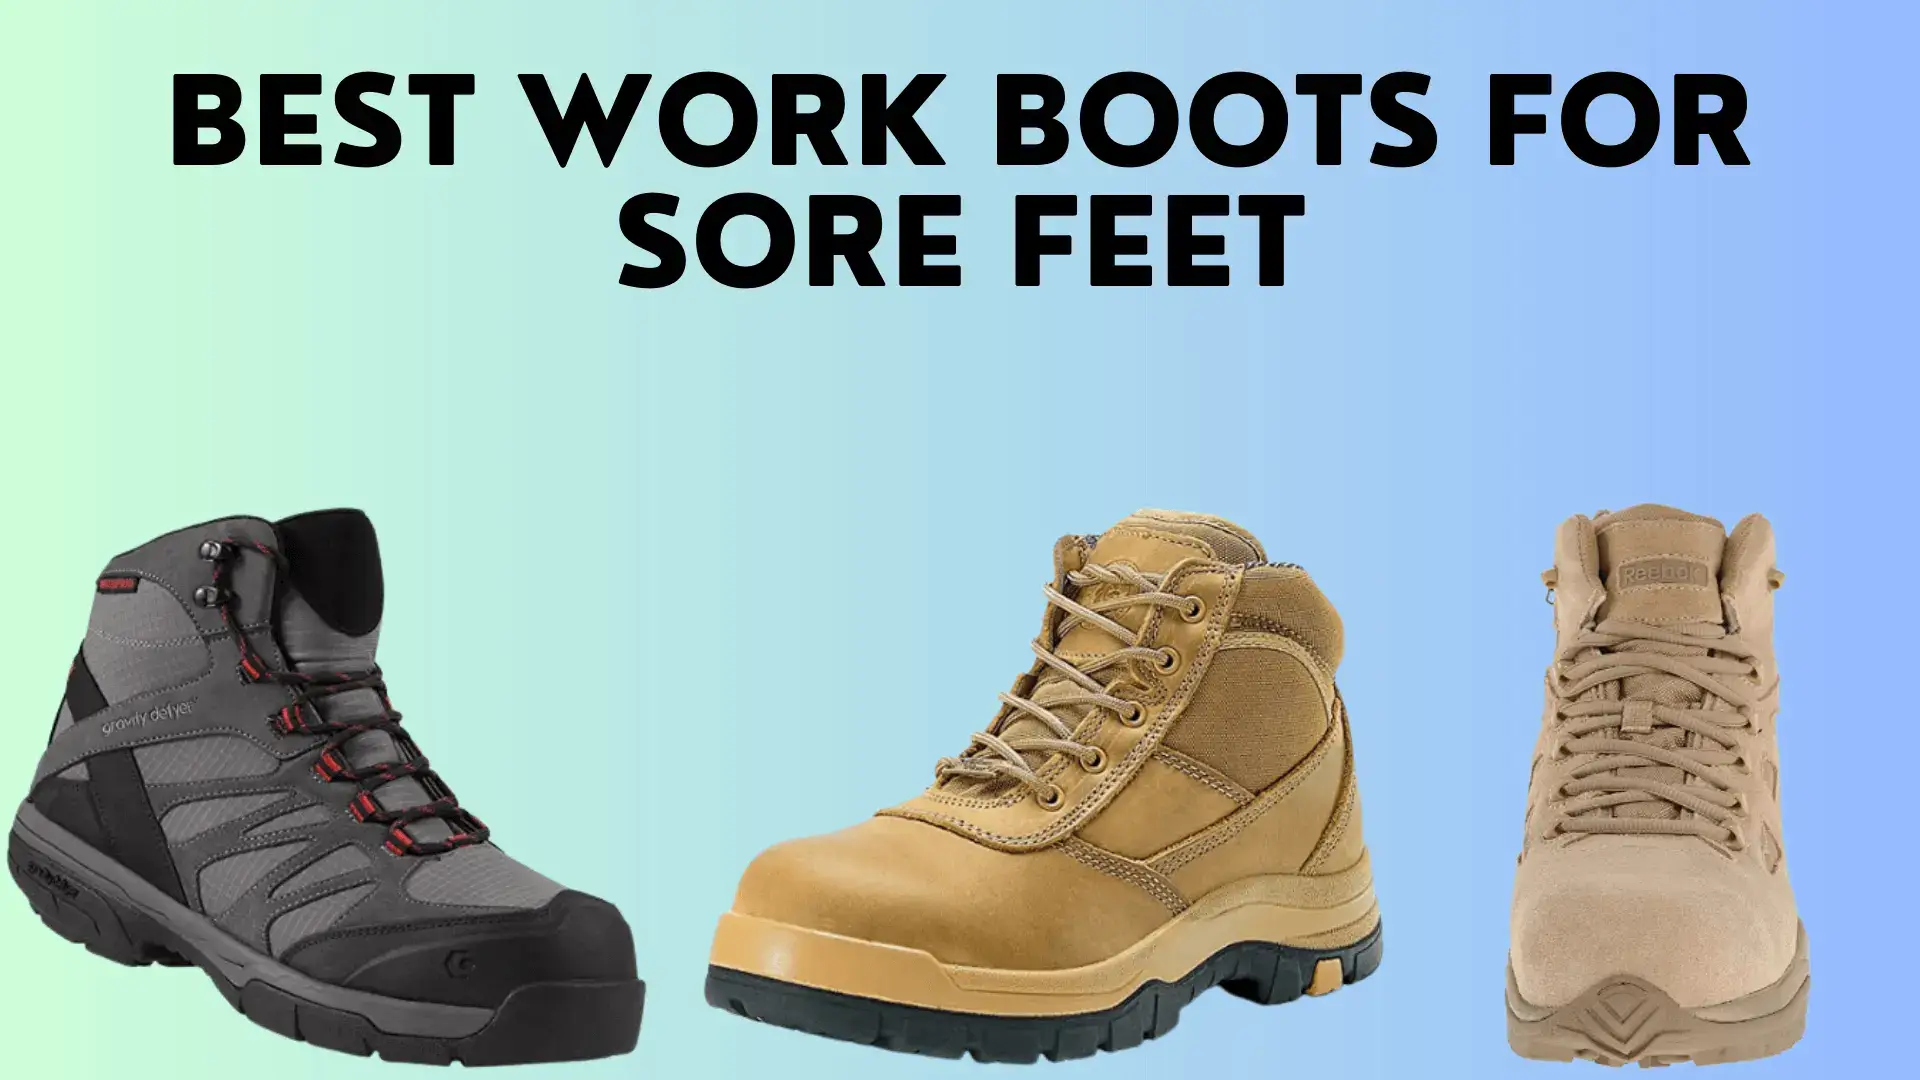 Best work boots for sore feet